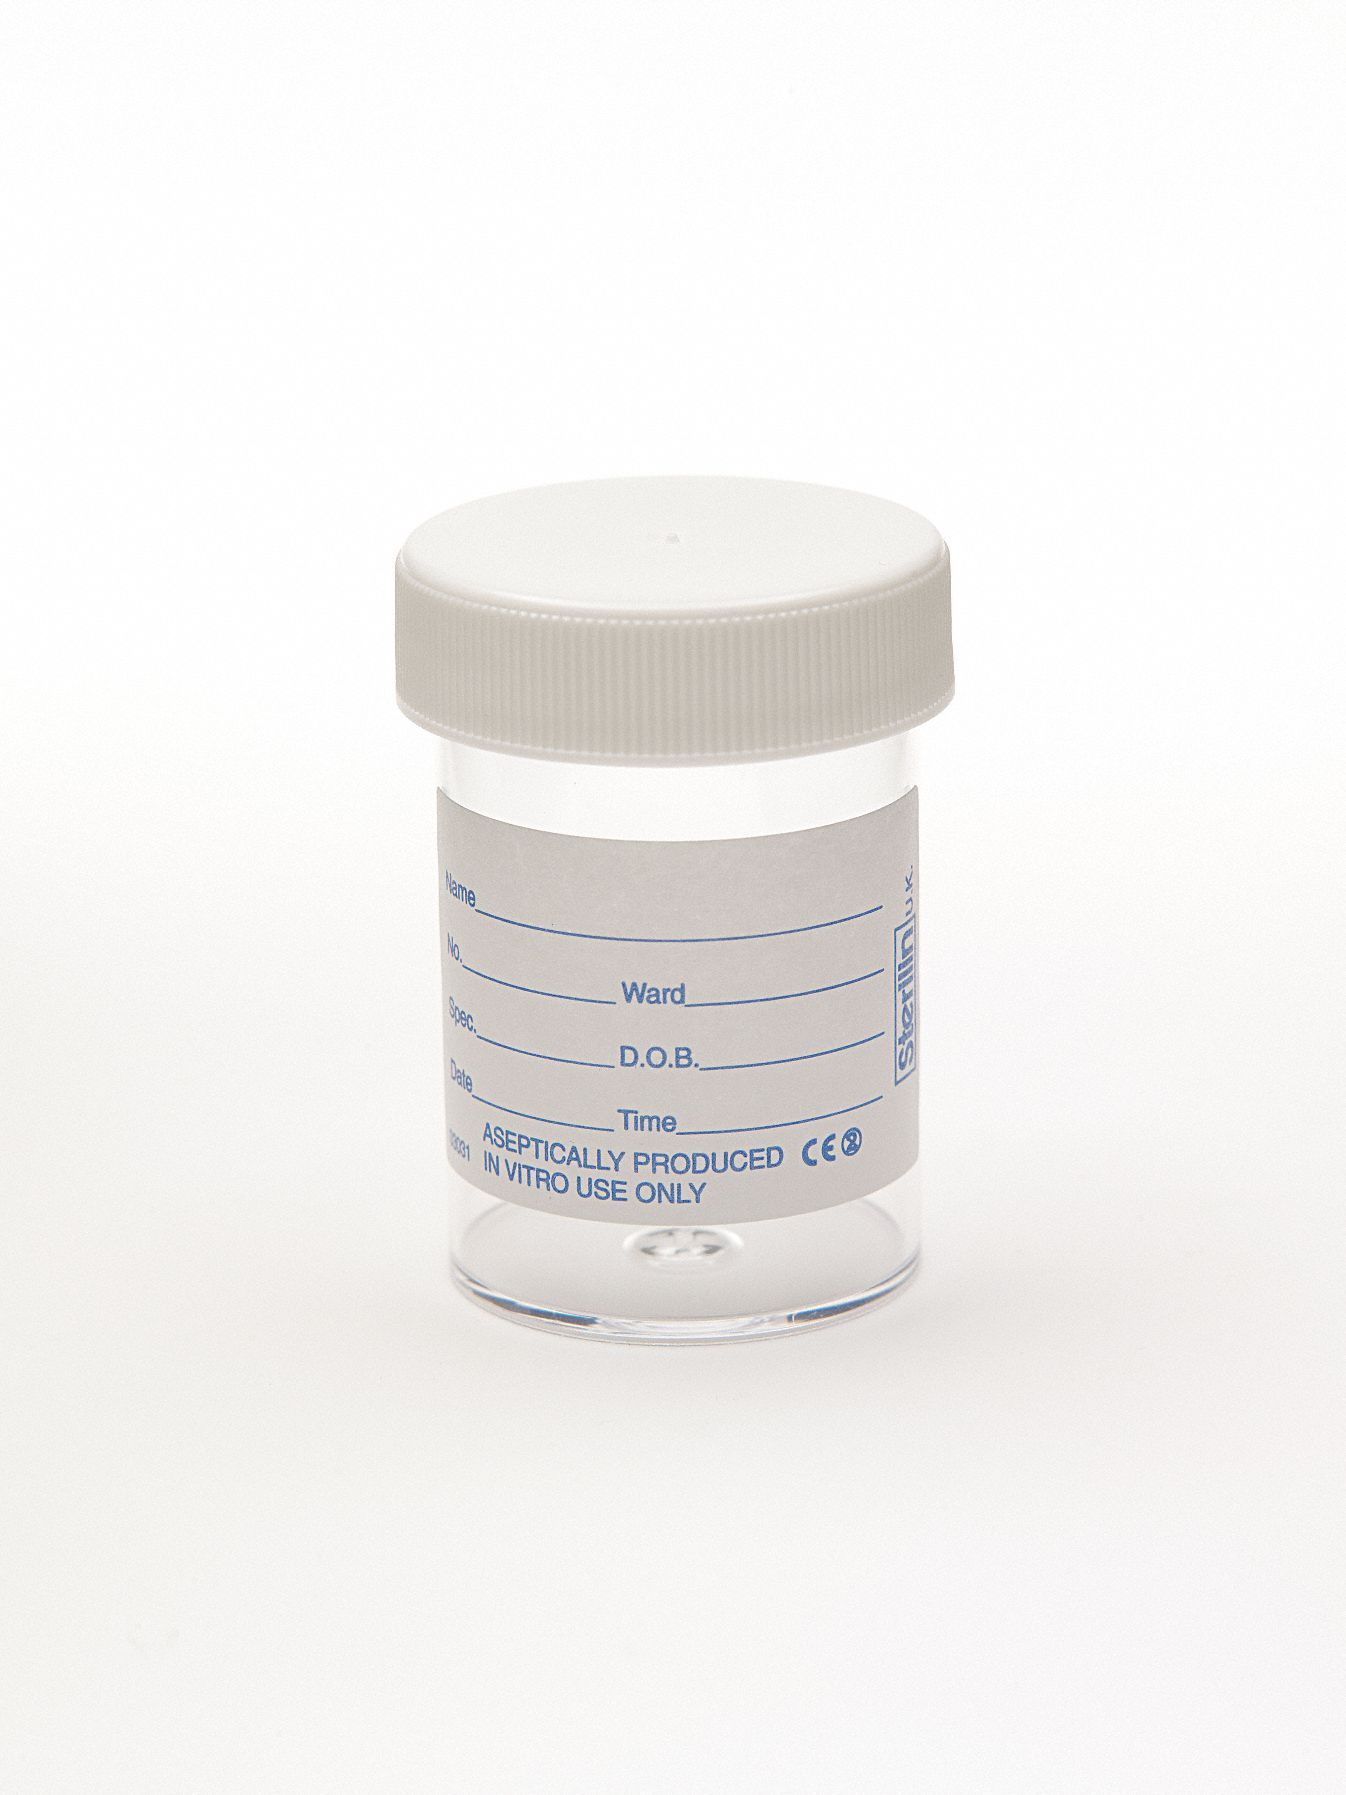 60mL Sample Container, Wide Mouth, Polystyrene, PK 300